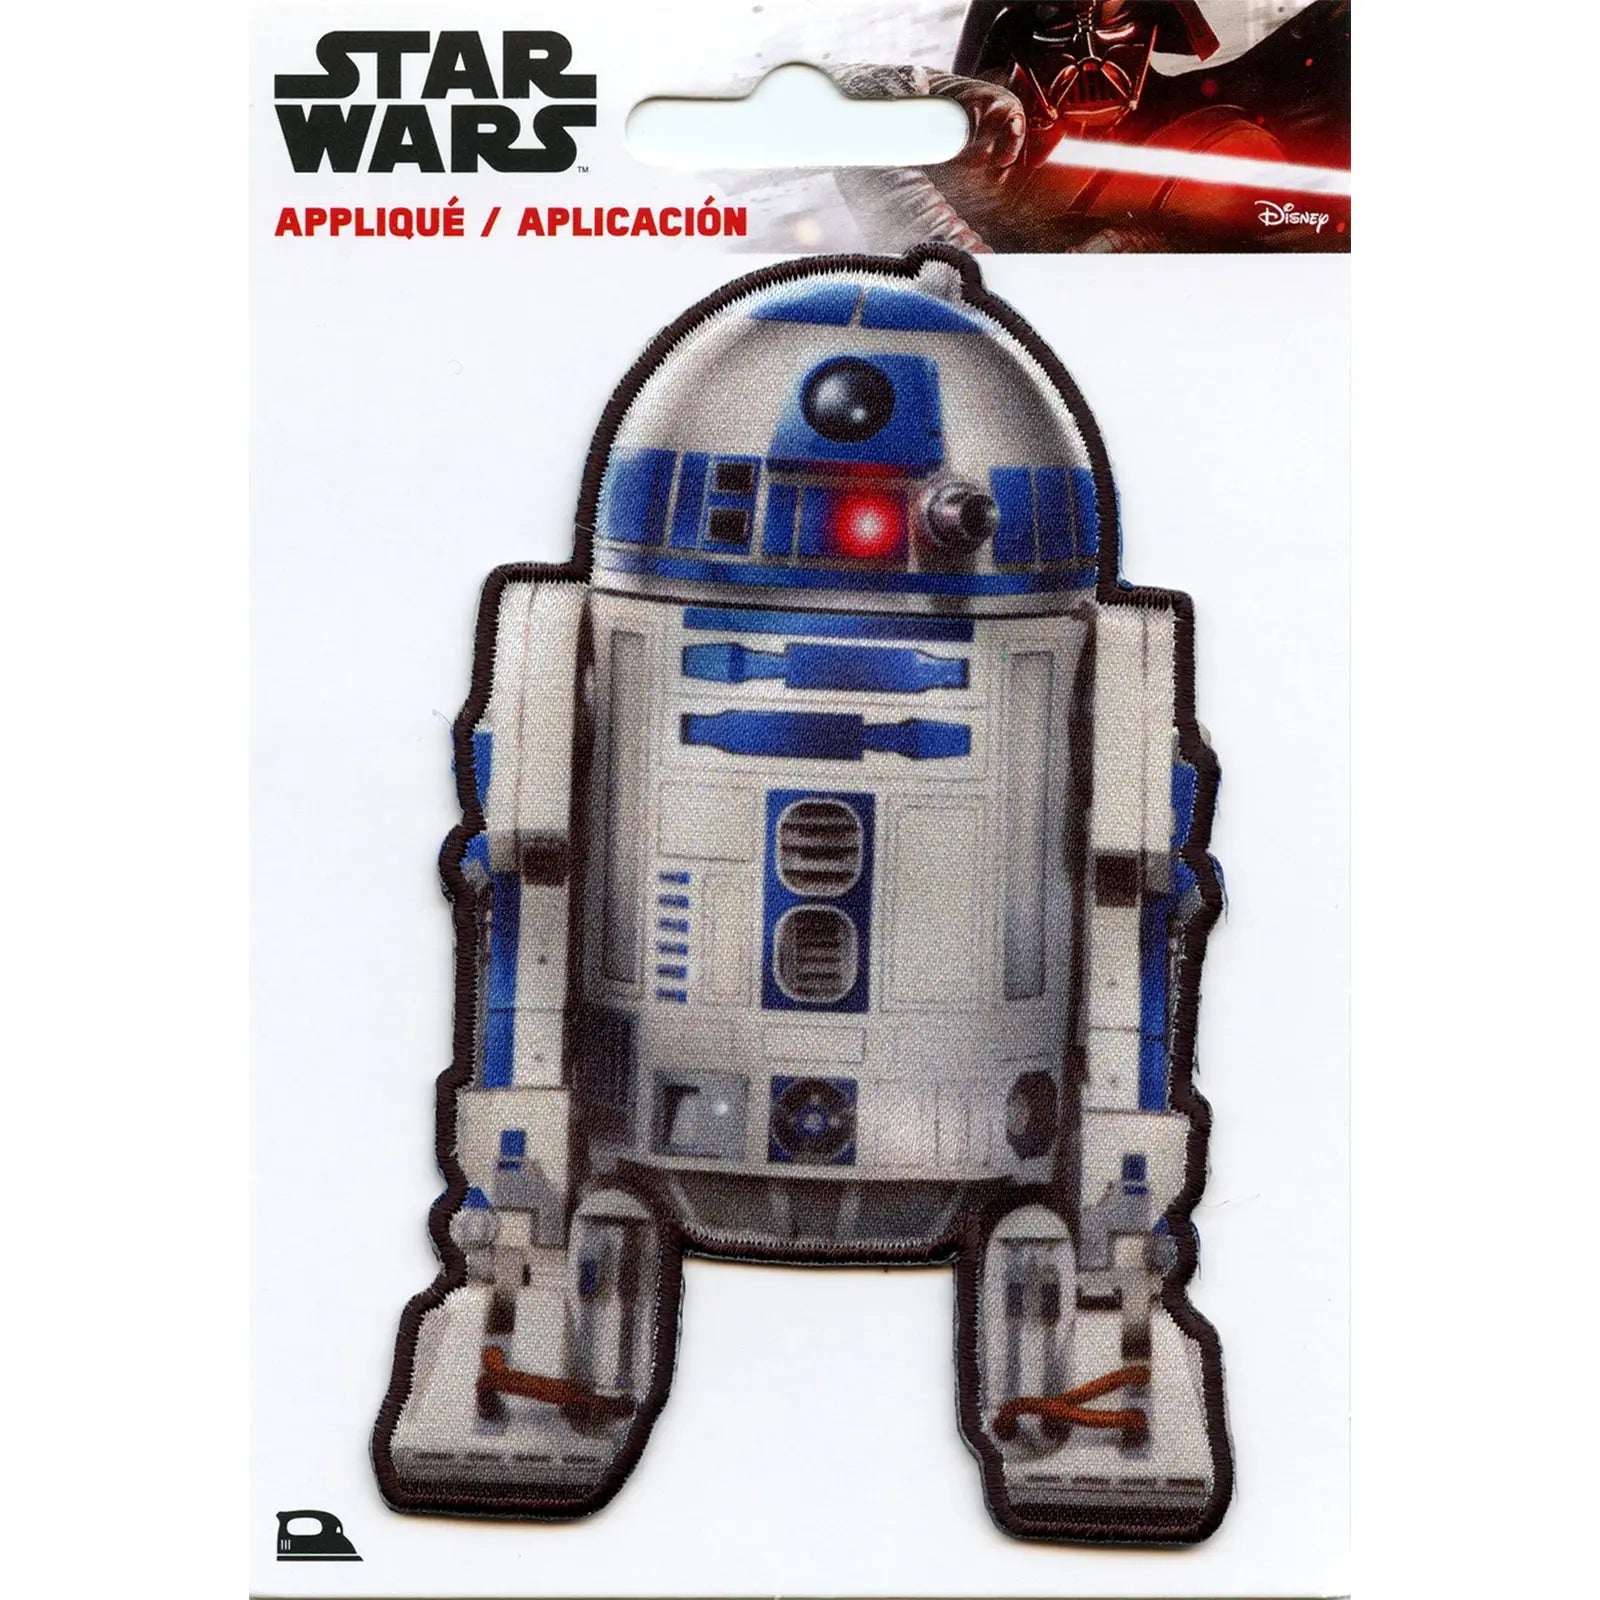 Star Wars R2-D2 Iron on Applique Patch 